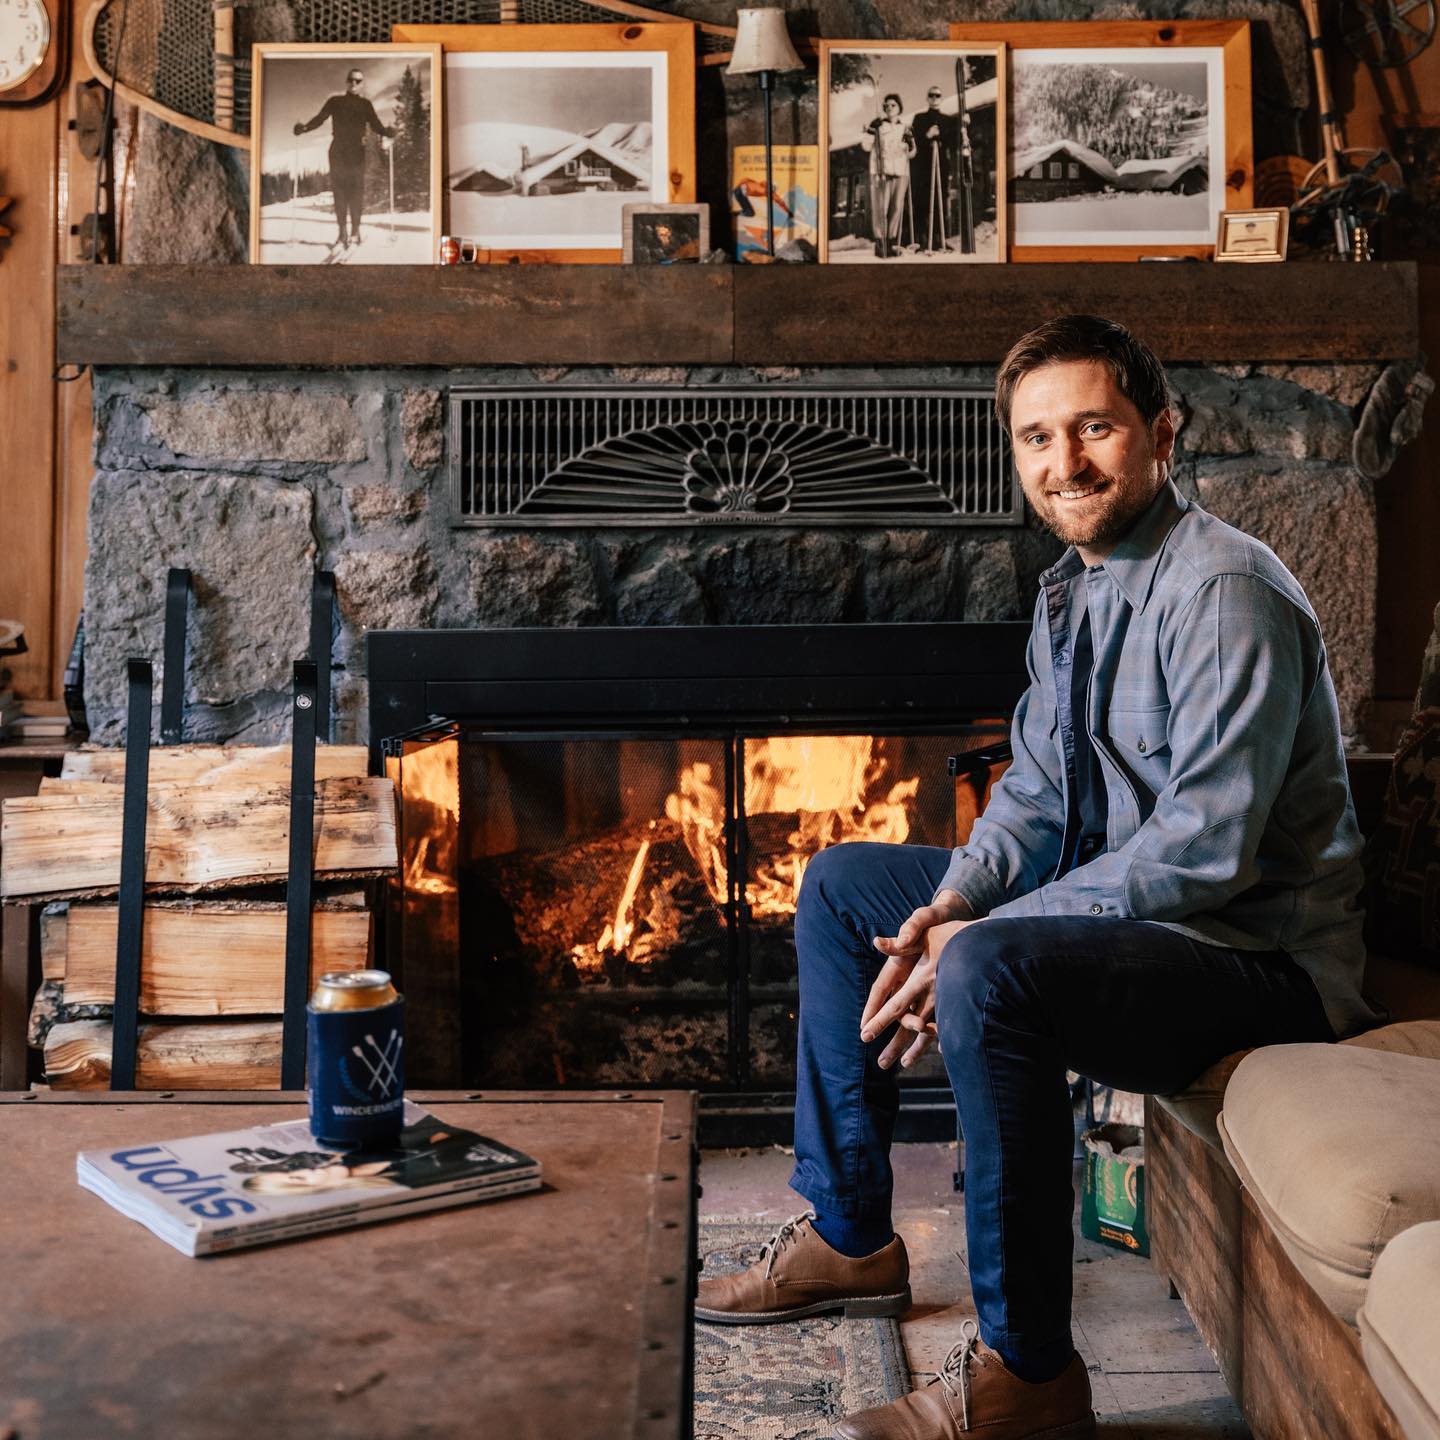 There’s a new generation at the helm of Windermere Real Estate. Thirty-year-old Logan Frederickson recently purchased the business from Dan Gorham, who has been with Windermere since 1999 and owner for the last five years. Read more in the June SVPN Magazine. @svpnmagazine @windermeresunvalley #svpnmagazine #windermeresunvalley #newgeneration #sunvalleyidaho